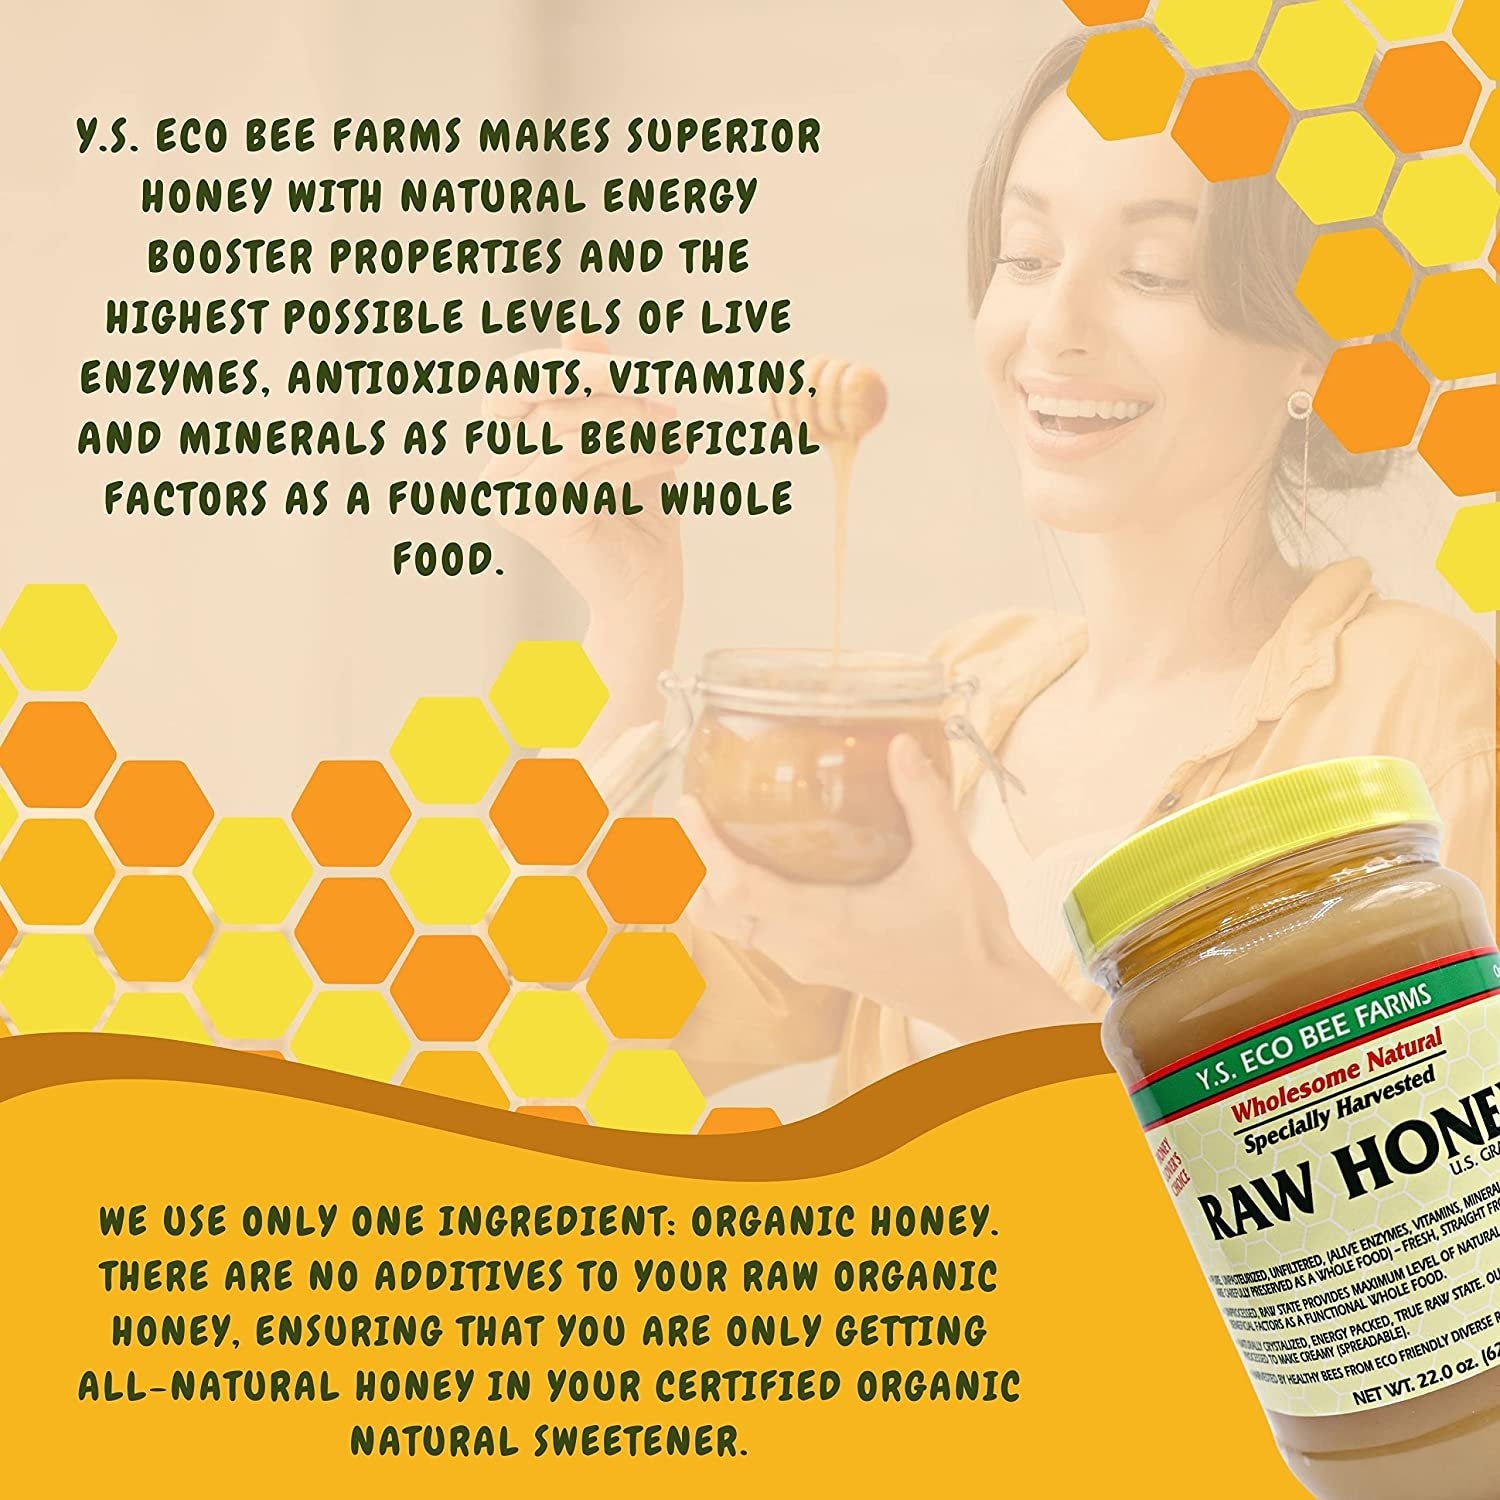 Y.S. Eco Bee Farms, Y.S. Organic Bee Farms, Natural Raw Honey, Unpasteurized, Unfiltered, Fresh Raw State, Kosher, Pure, Natural, Healthy, Safe, Gluten Free, Specially Harvested, 22oz, 1 Count